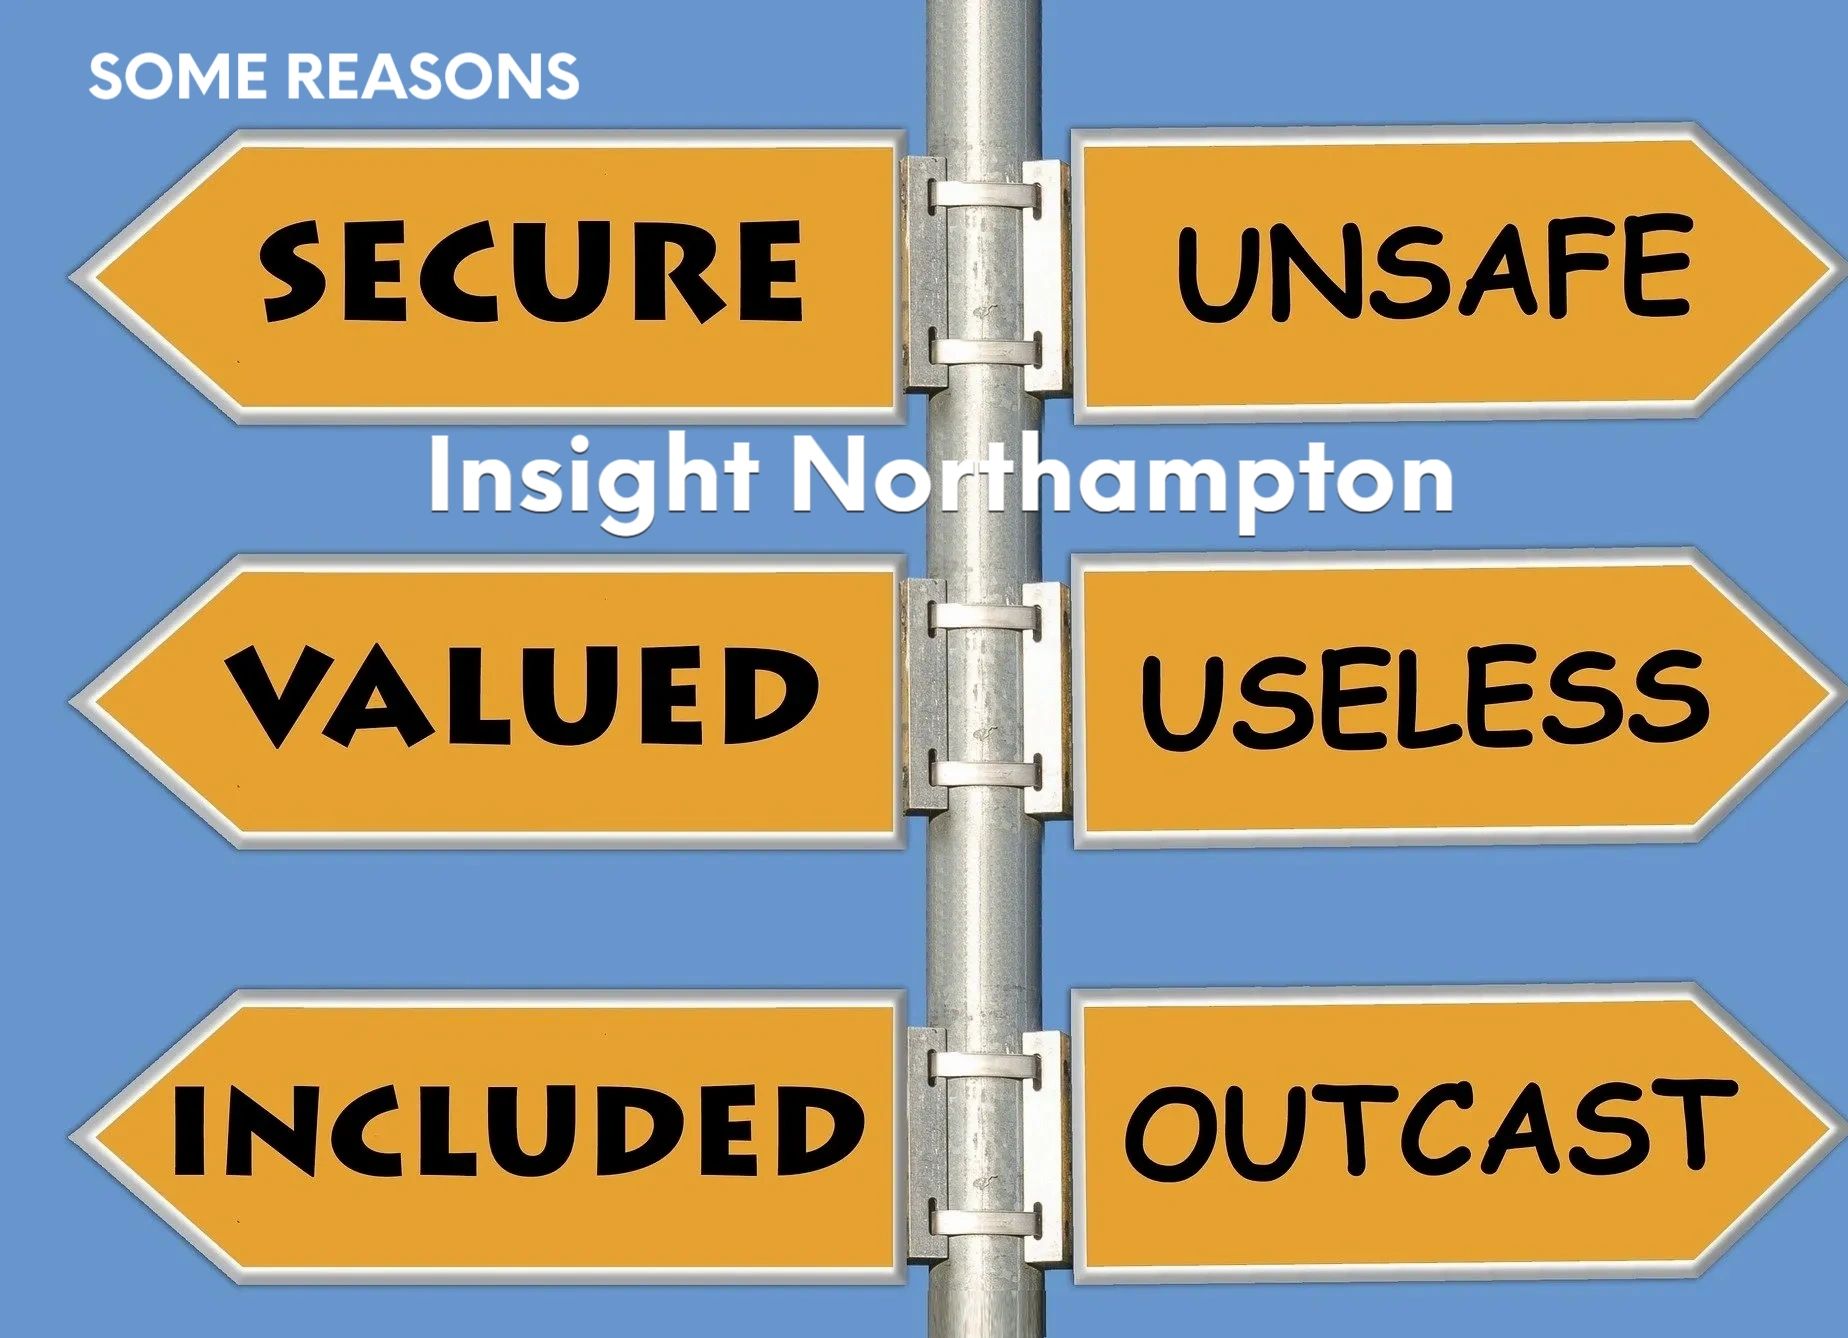 Some reasons to use Insight Northamptons' counselling service